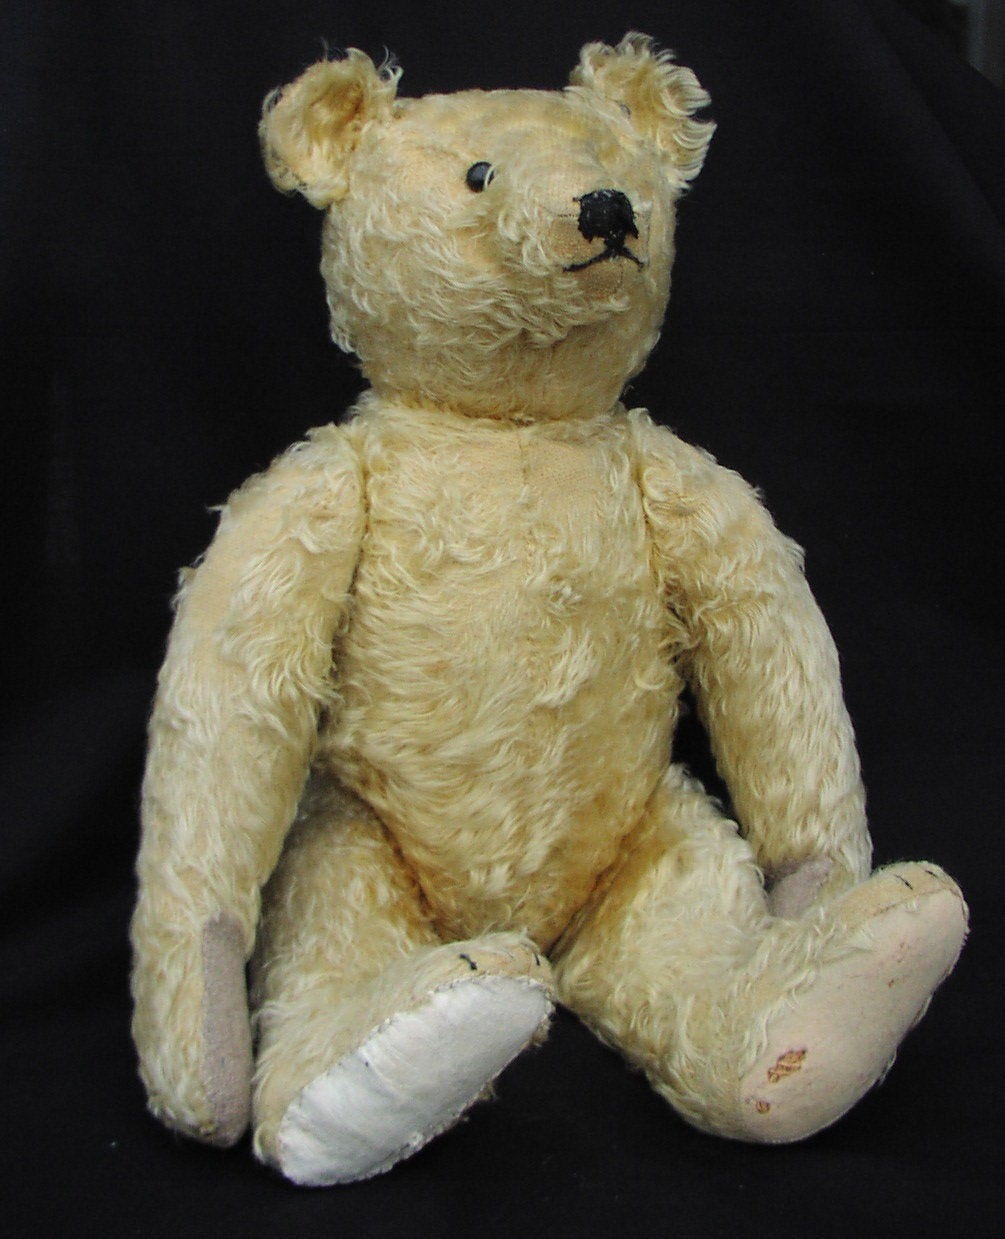 The Worlds Most Expensive Teddy: 125 Carat Bear from Steiff has a